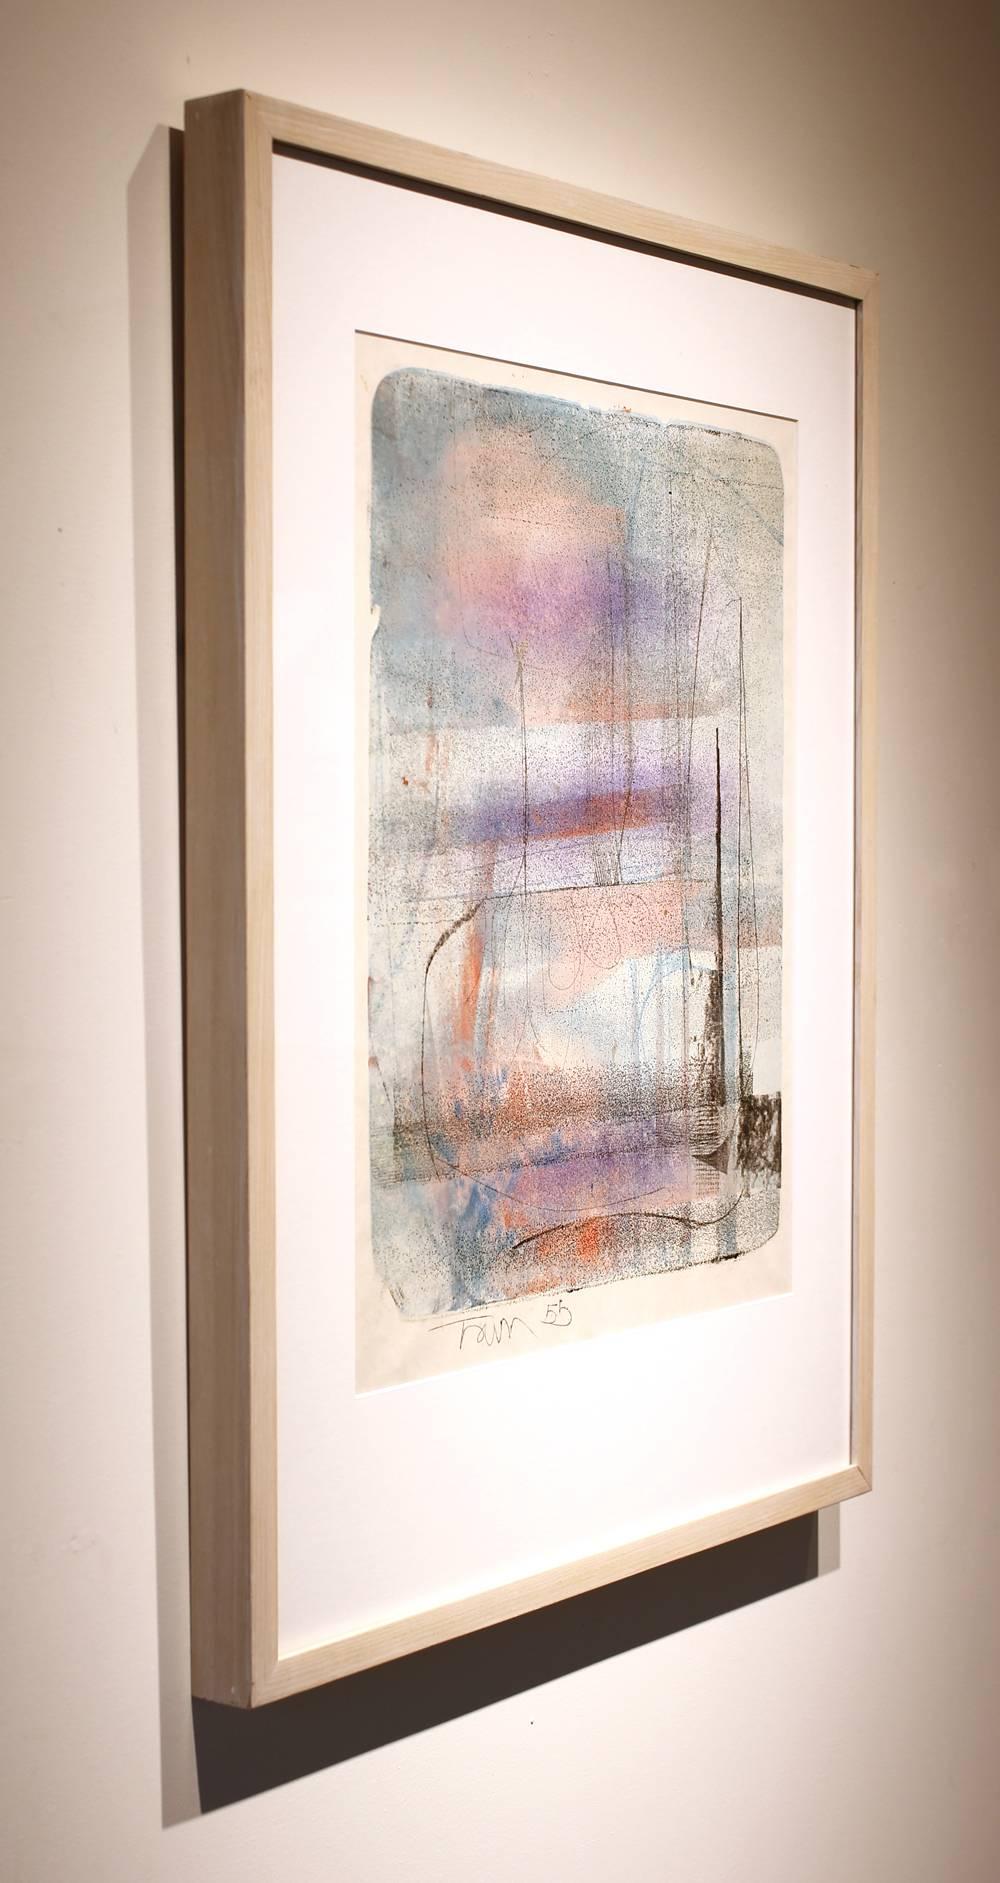 This abstract monoprint is by prominent Canadian artist Harold Town. Town was an abstract painter, one of the best known of the Painters Eleven, a group based in Toronto in the 1950’s who threw off the landscape-based reputation of Canadian art. His